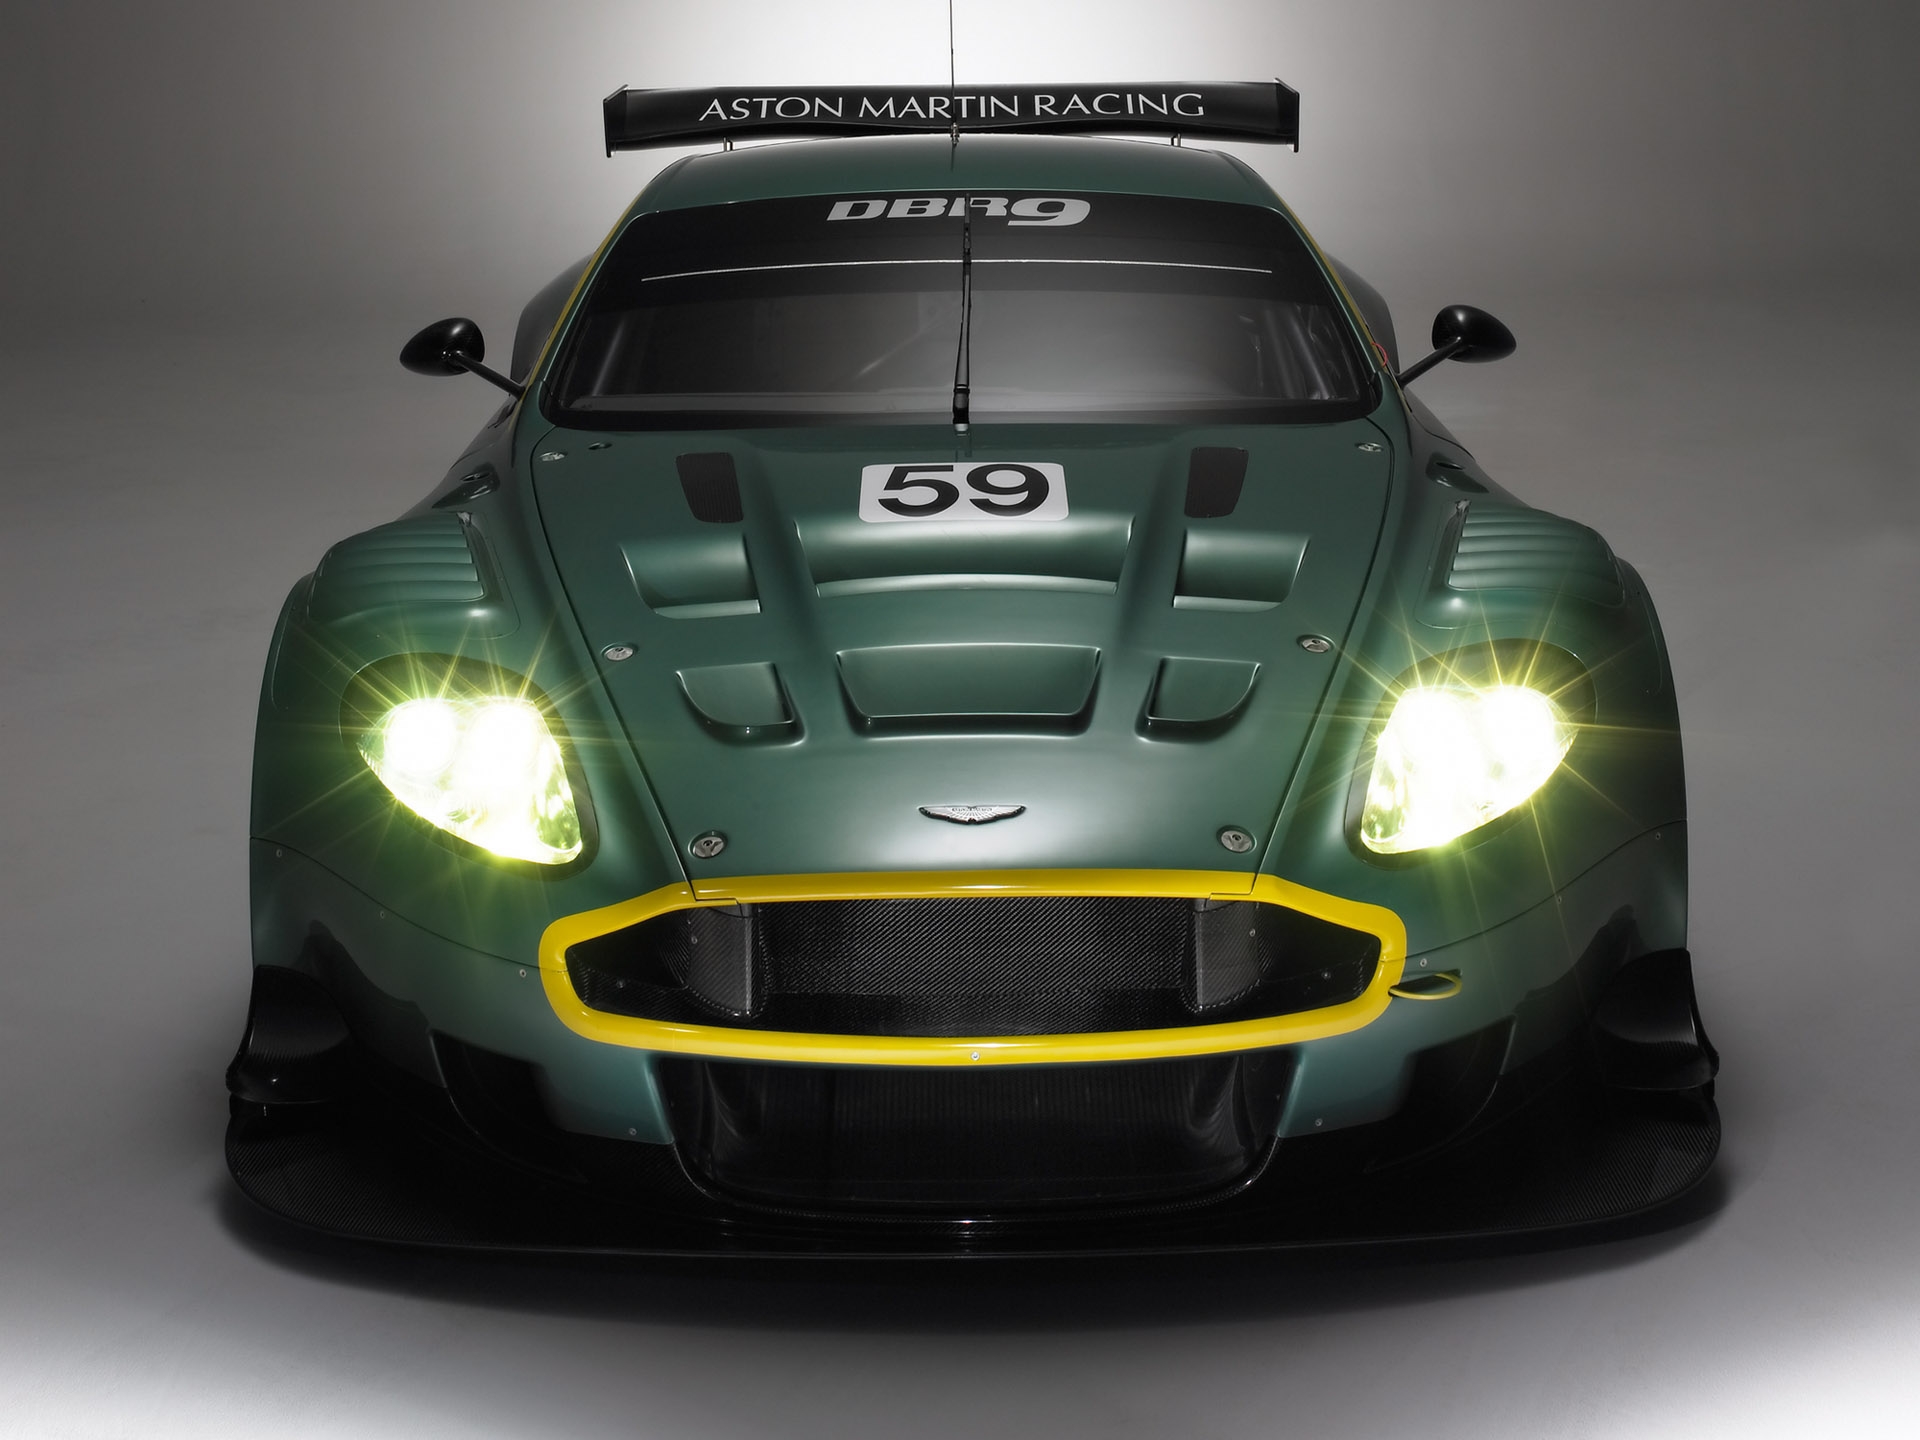 racing car, sports, auto, aston martin, cars, green, front view, style, 2005, dbr9